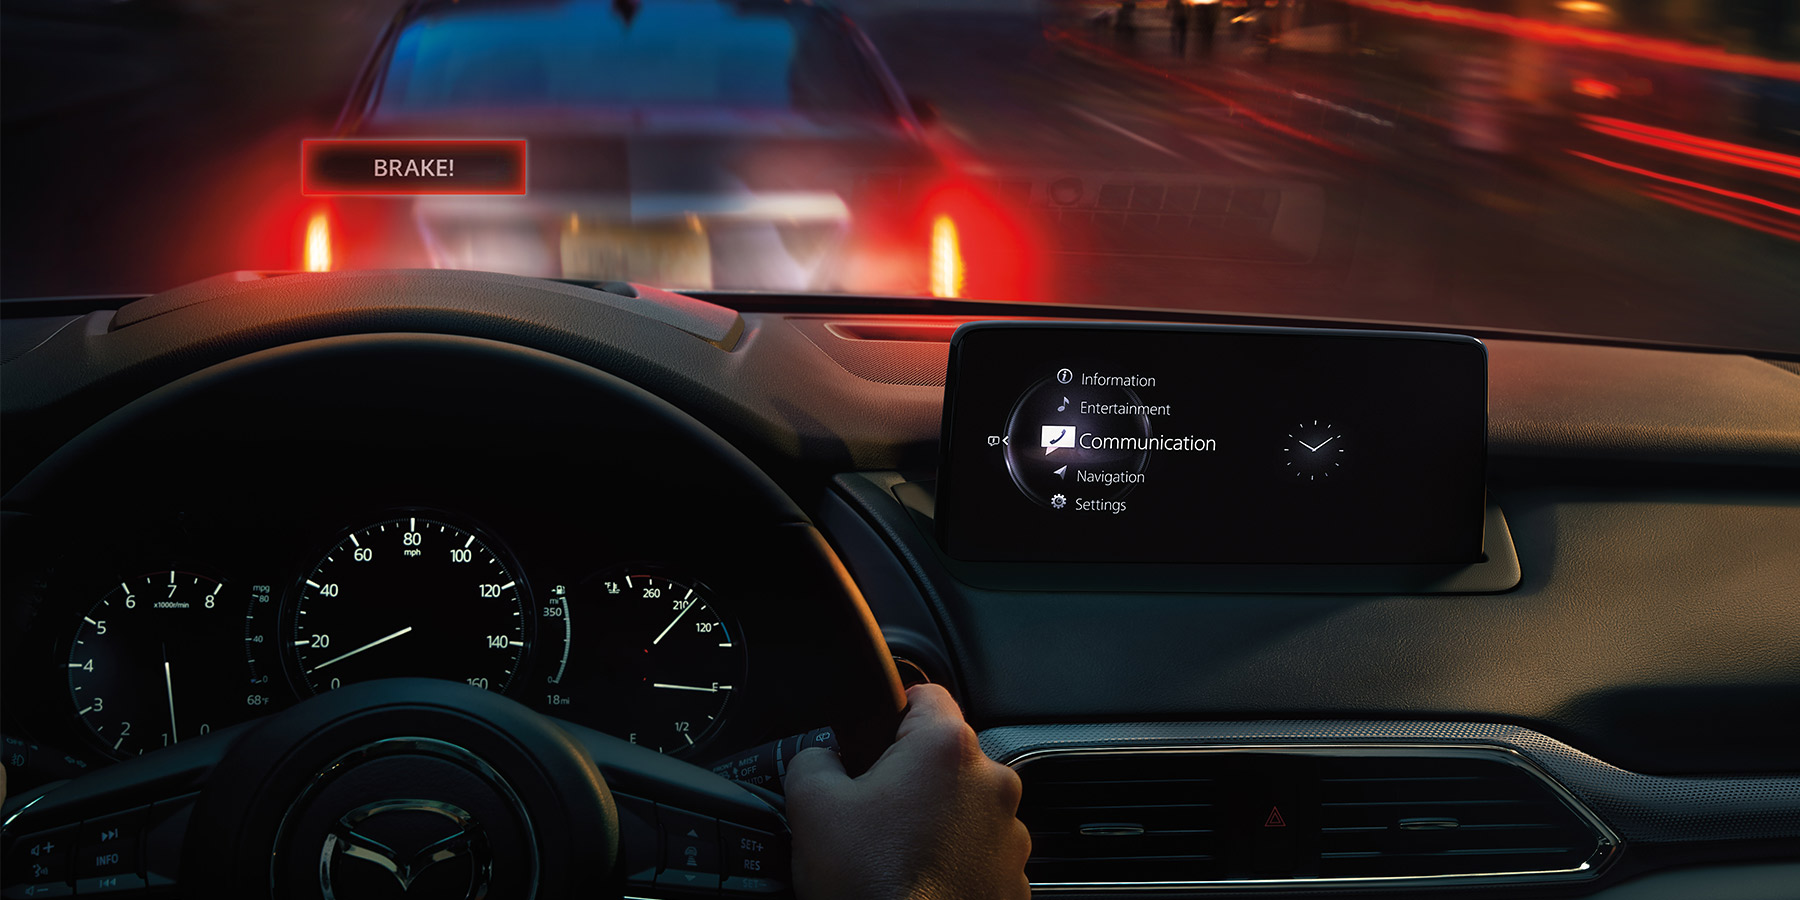 THINKING SMARTER AND FASTER, FOR A SAFER DRIVE